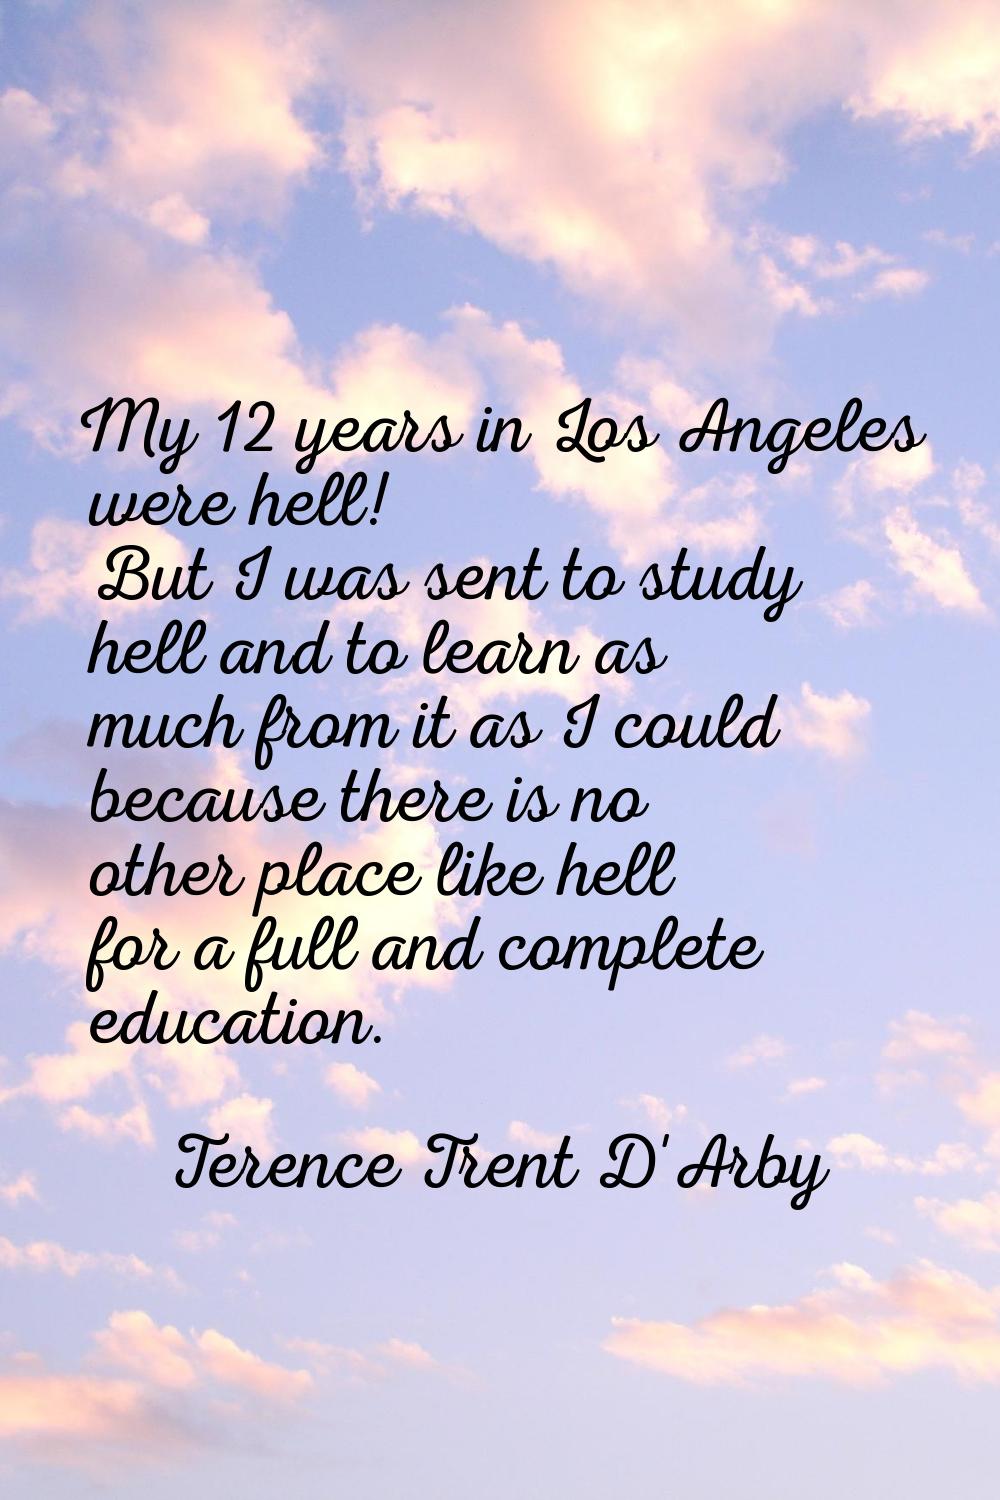 My 12 years in Los Angeles were hell! But I was sent to study hell and to learn as much from it as 